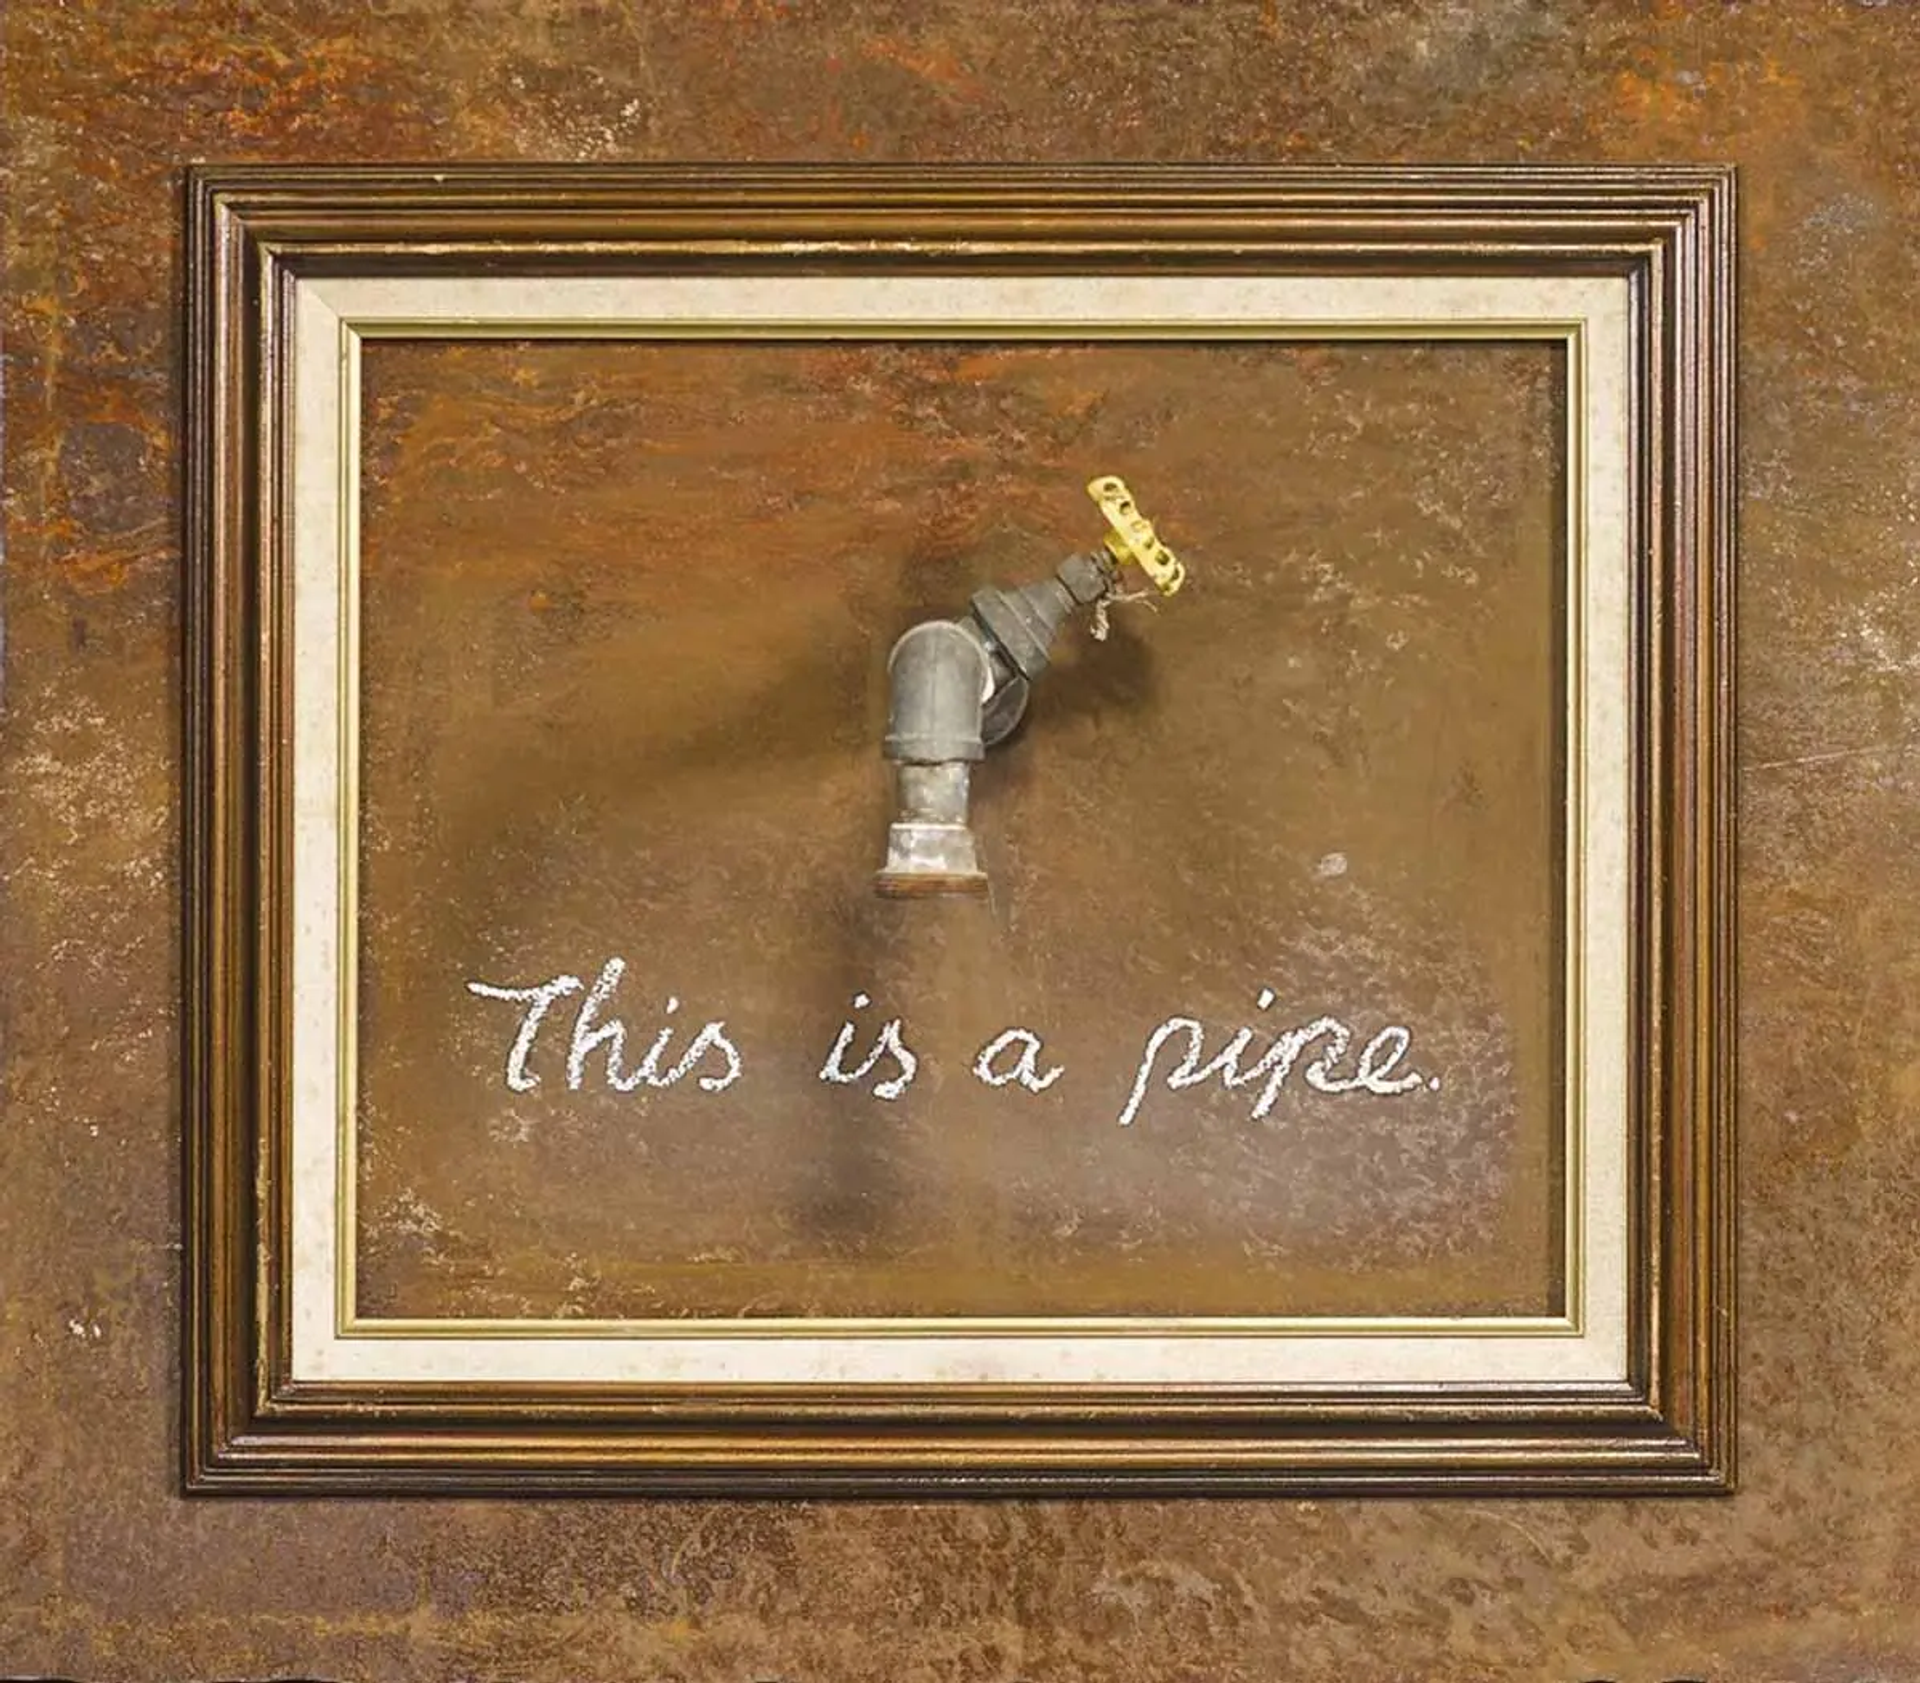 Drawing inspiration from the work of René Magritte, This Is A Pipe by Banksy presents a metal spigot framed in a gilt frame. The words ‘this is a pipe’ appear underneath the object, playfully reconfiguring The Treachery Of Images (1929).